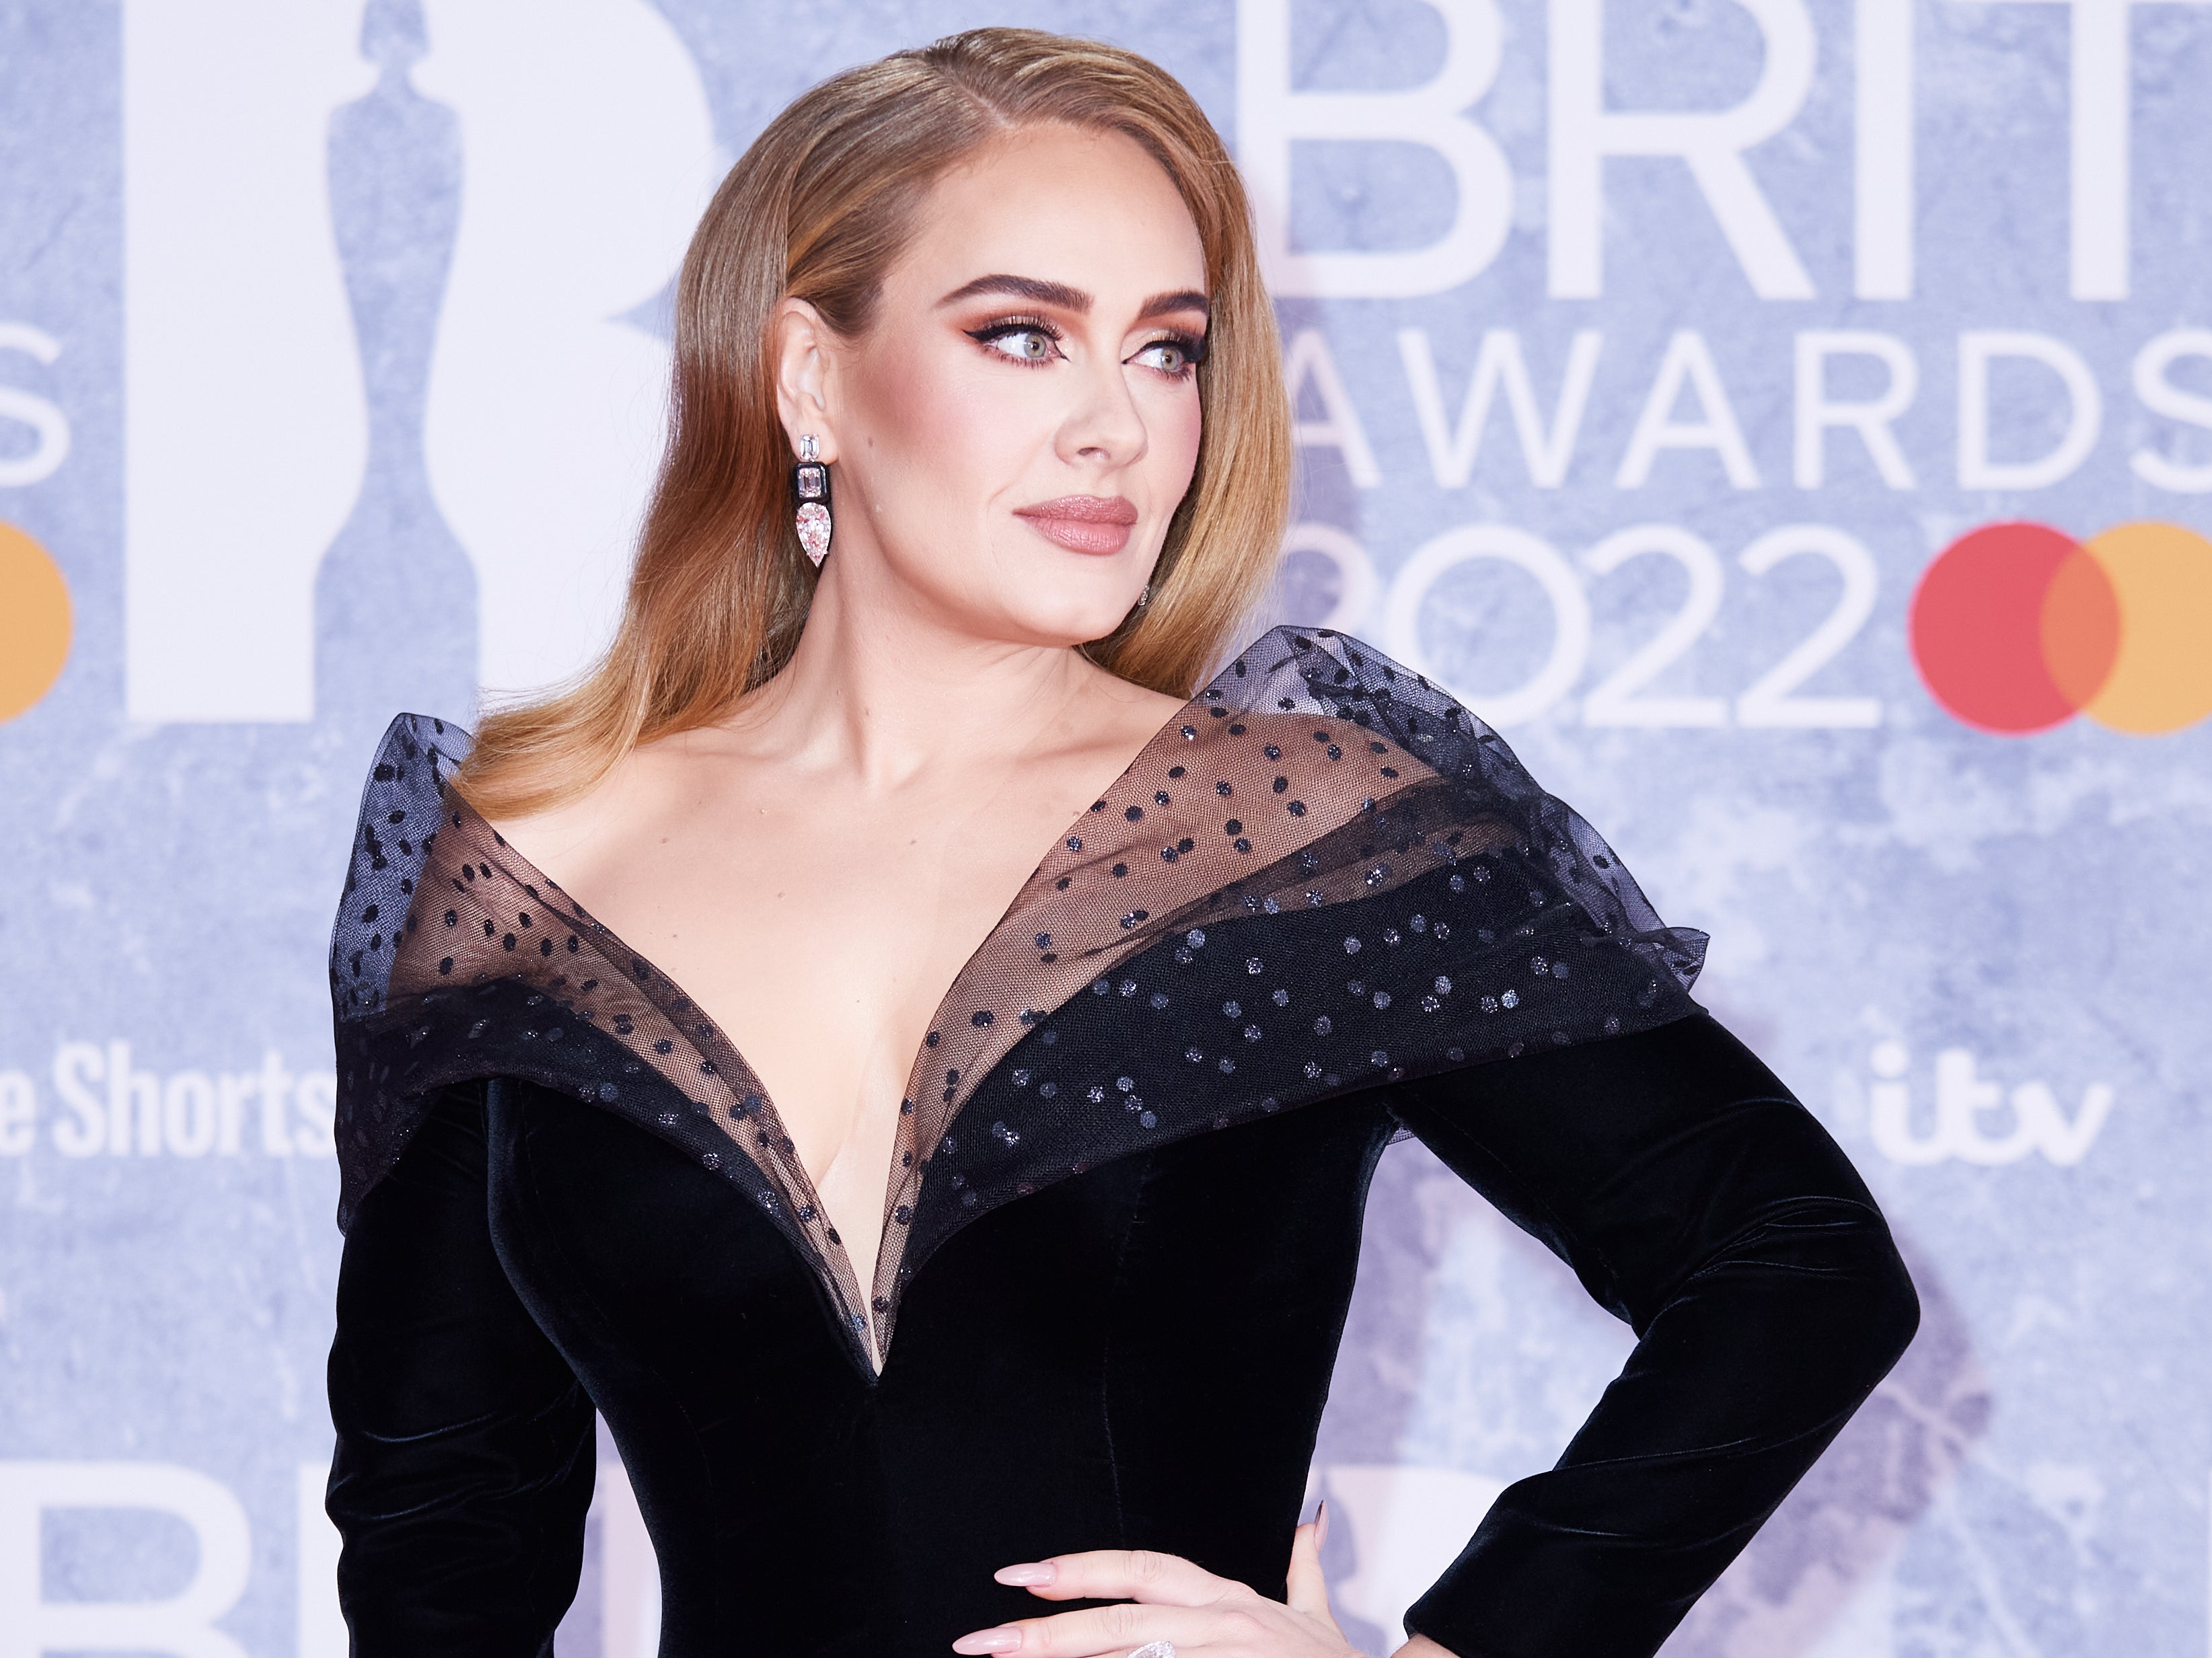 Adele attends The BRIT Awards 2022 at The O2 Arena on February 08, 2022